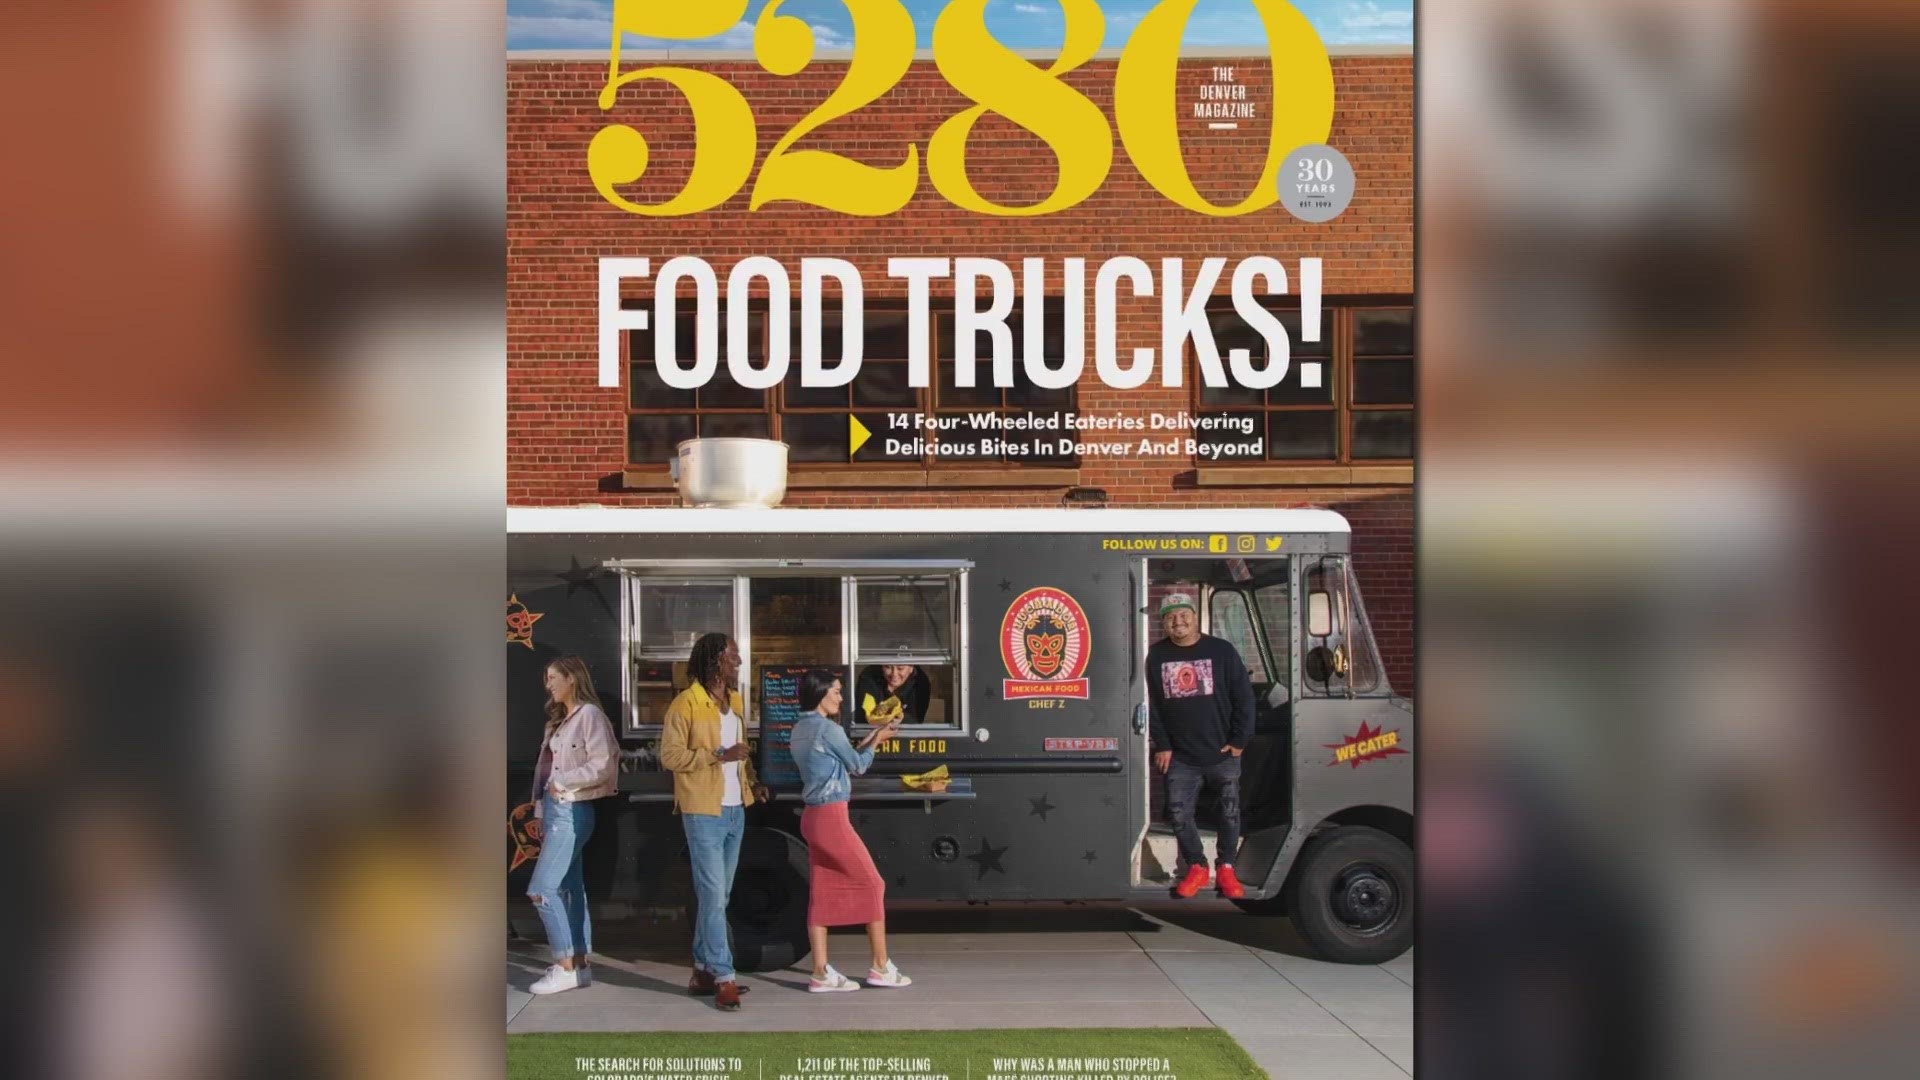 5280 Magazine's March issue is all about Denver's food truck scene and the chefs behind it.